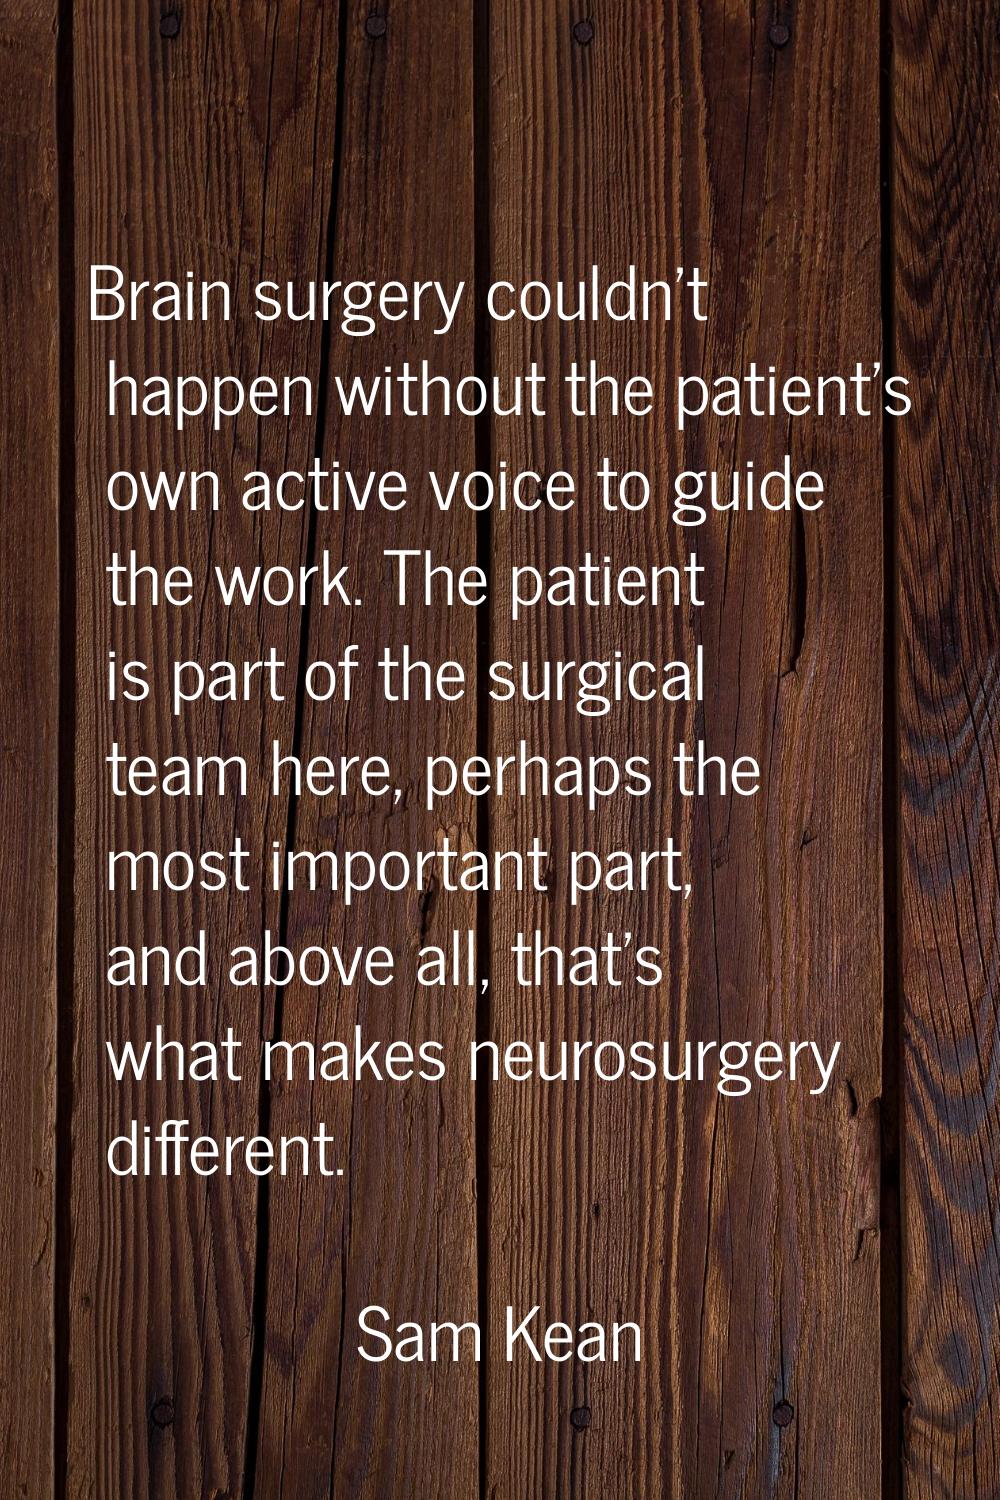 Brain surgery couldn't happen without the patient's own active voice to guide the work. The patient